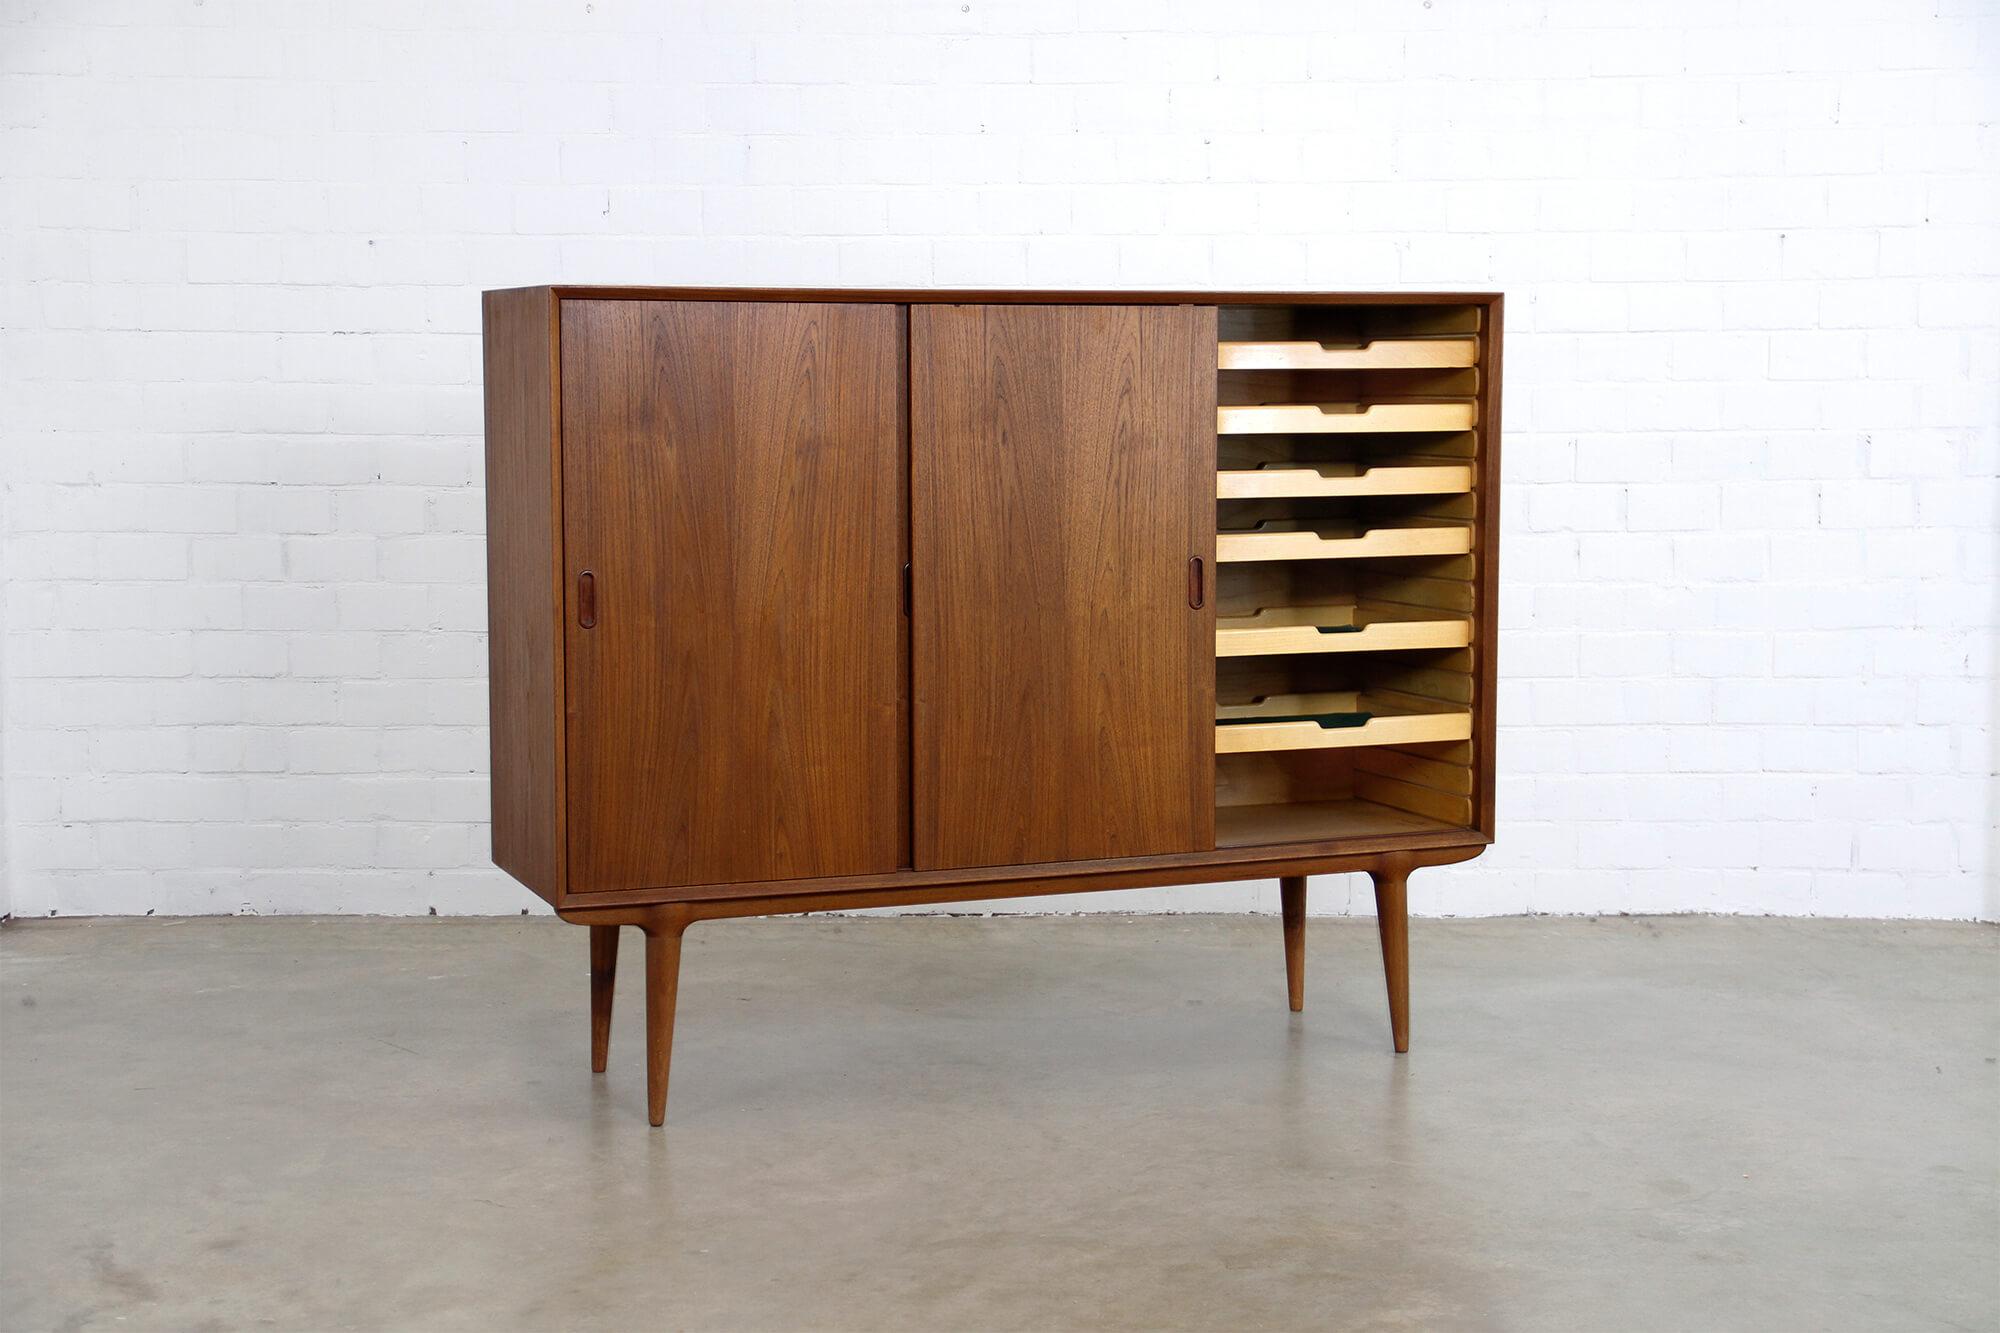 This beautiful Model 5 highboard was designed for Omann Jun Møbelfabrik in Denmark, 1960s. The sideboard has three sliding doors and integrated drawers finished in teak.